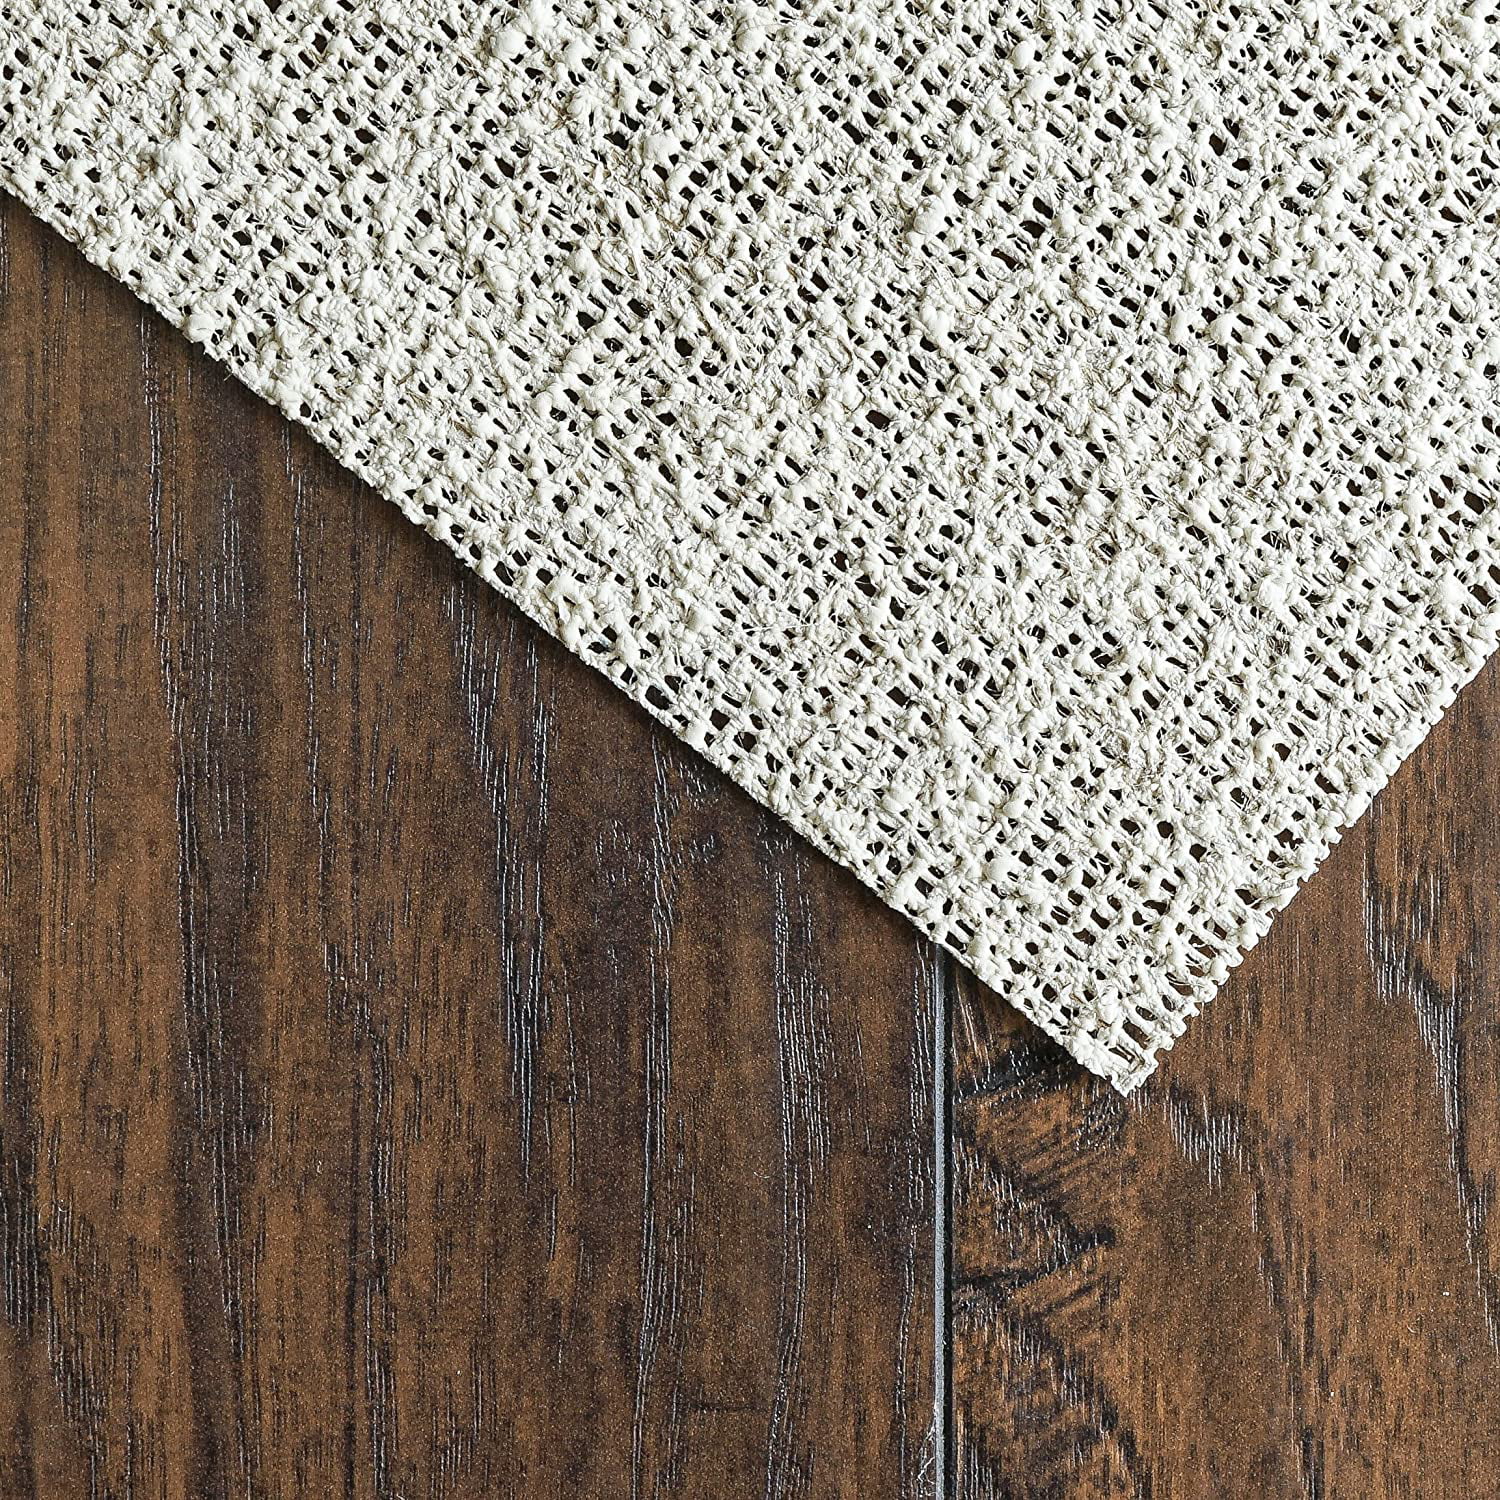 RUGPADUSA - Nature's Grip - 2'x3' - 1/16 Thick - Rubber and Jute -  Eco-Friendly Non-Slip Rug Pad - Safe for Your Floors and Your Family, Many  Custom